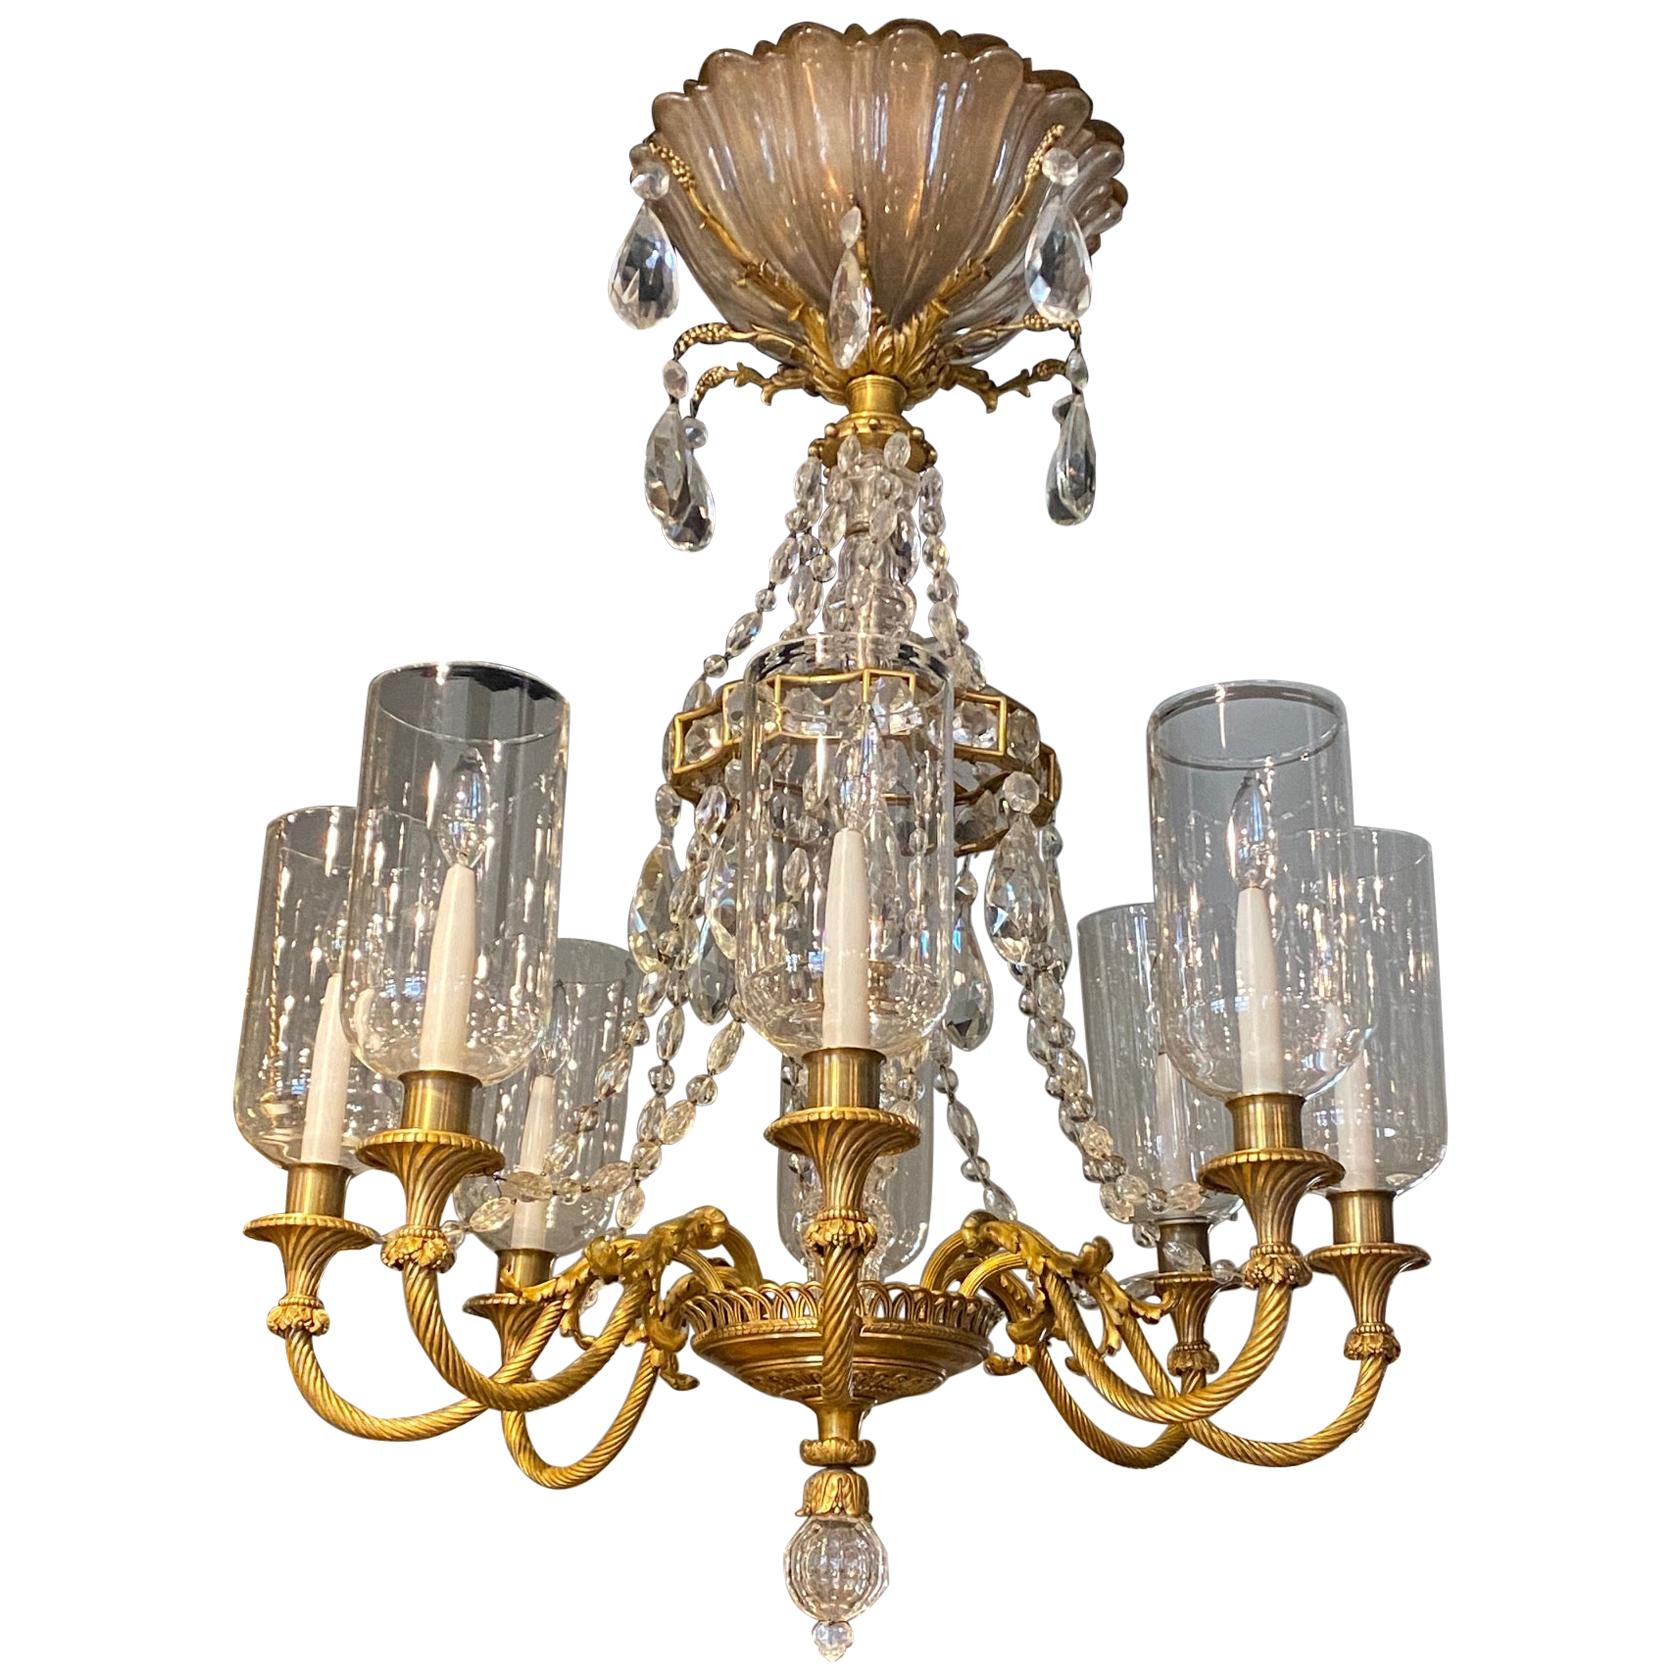 Very Fine Neoclassical Gilt Bronze and Crystal Chandelier by Maison Baguès